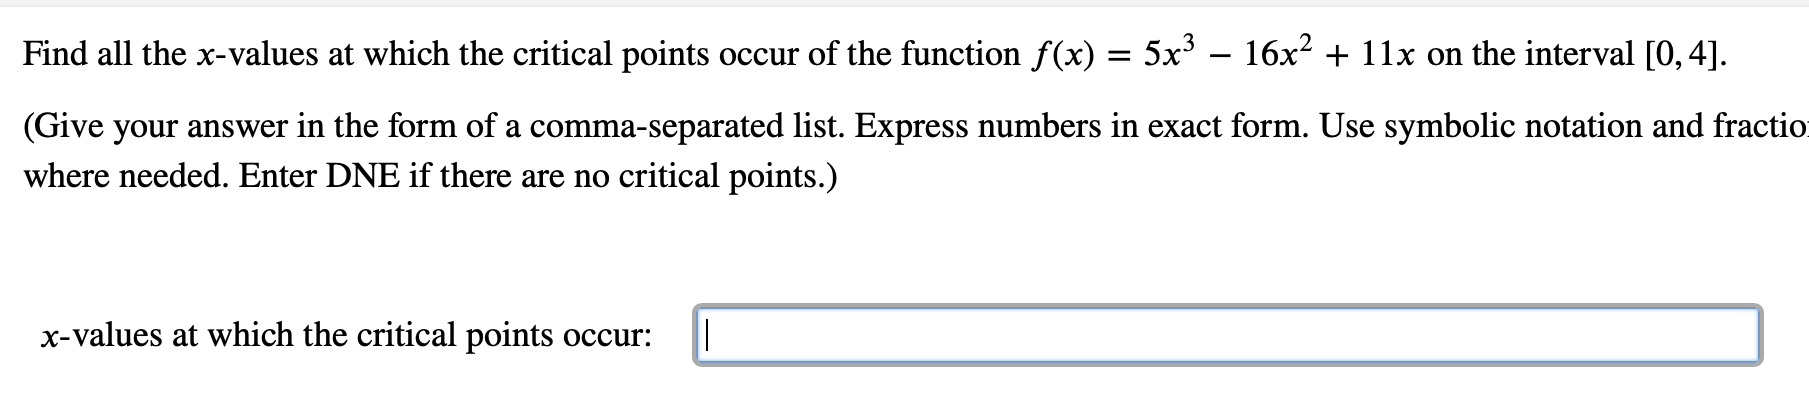 Find all the x-values at which the critical points occur of the function f(x) = 5x' – 16x2 + 11x on the interval [0, 4].
(Give your answer in the form of a comma-separated list. Express numbers in exact form. Use symbolic notation and fractio
where needed. Enter DNE if there are no critical points.)
x-values at which the critical points occur:
